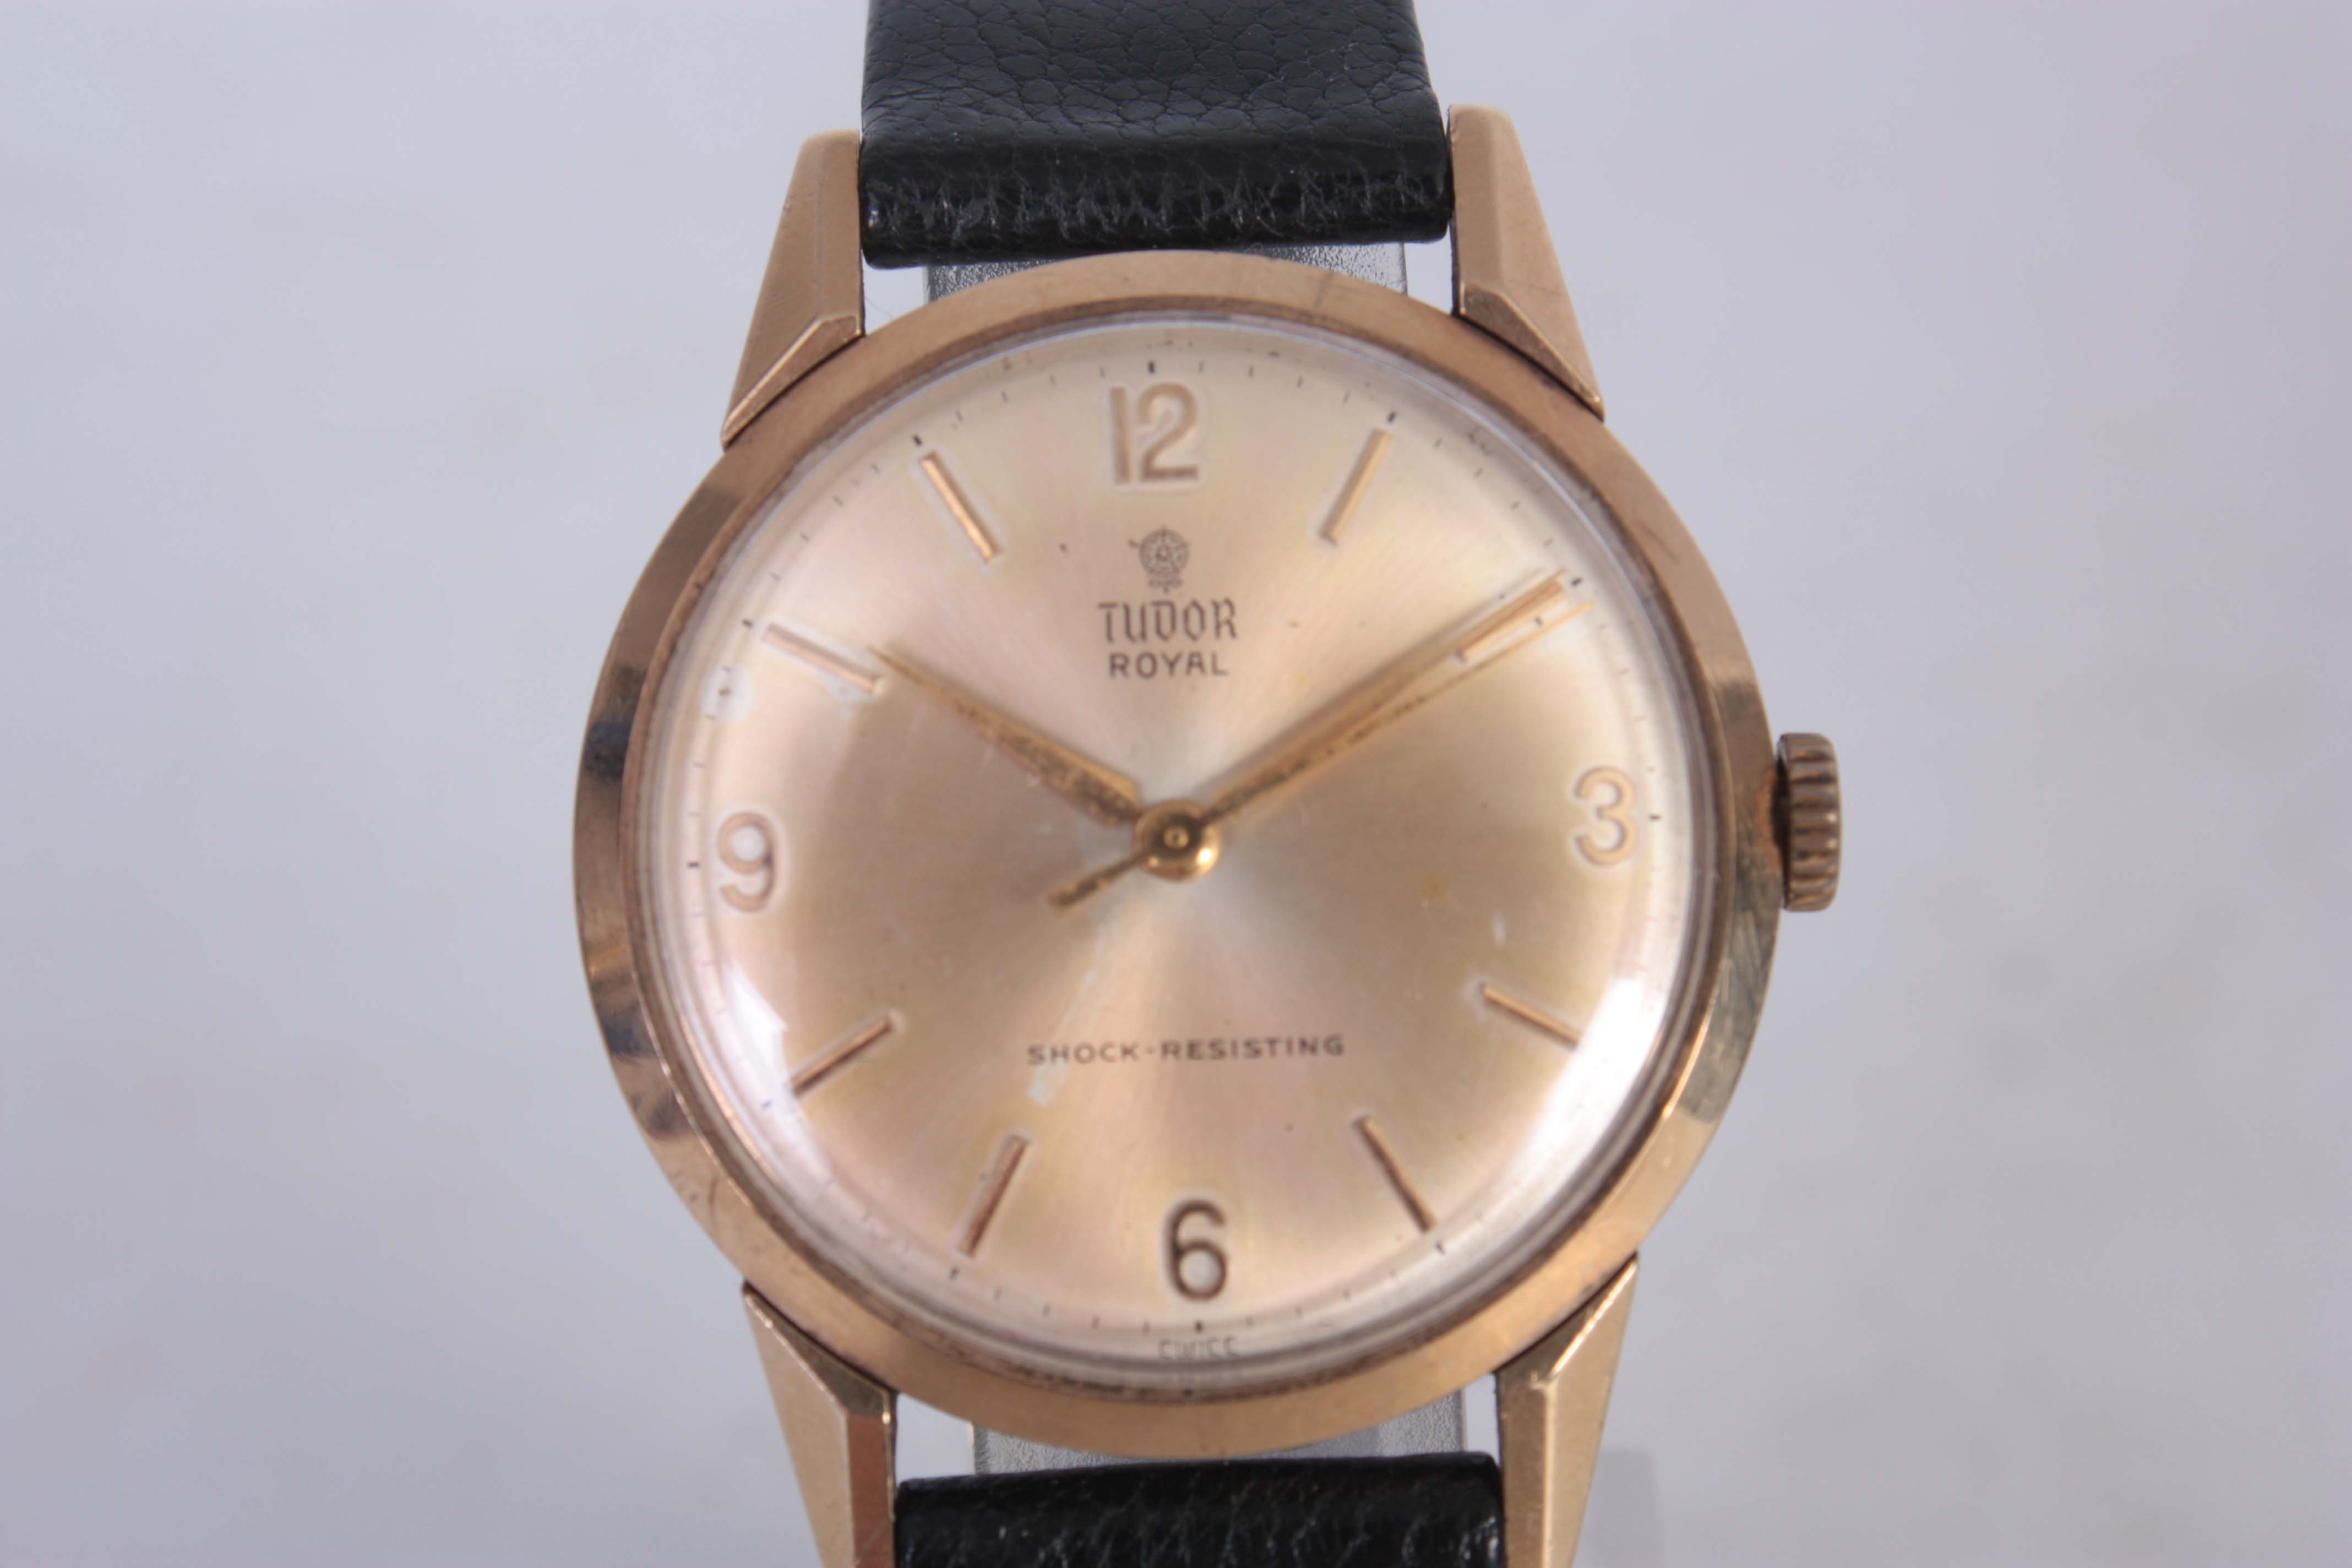 A GENTLEMANS VINTAGE 9CT GOLD TUDOR ROYAL WRIST WATCH on a black leather strap, the gold dial with - Image 2 of 5